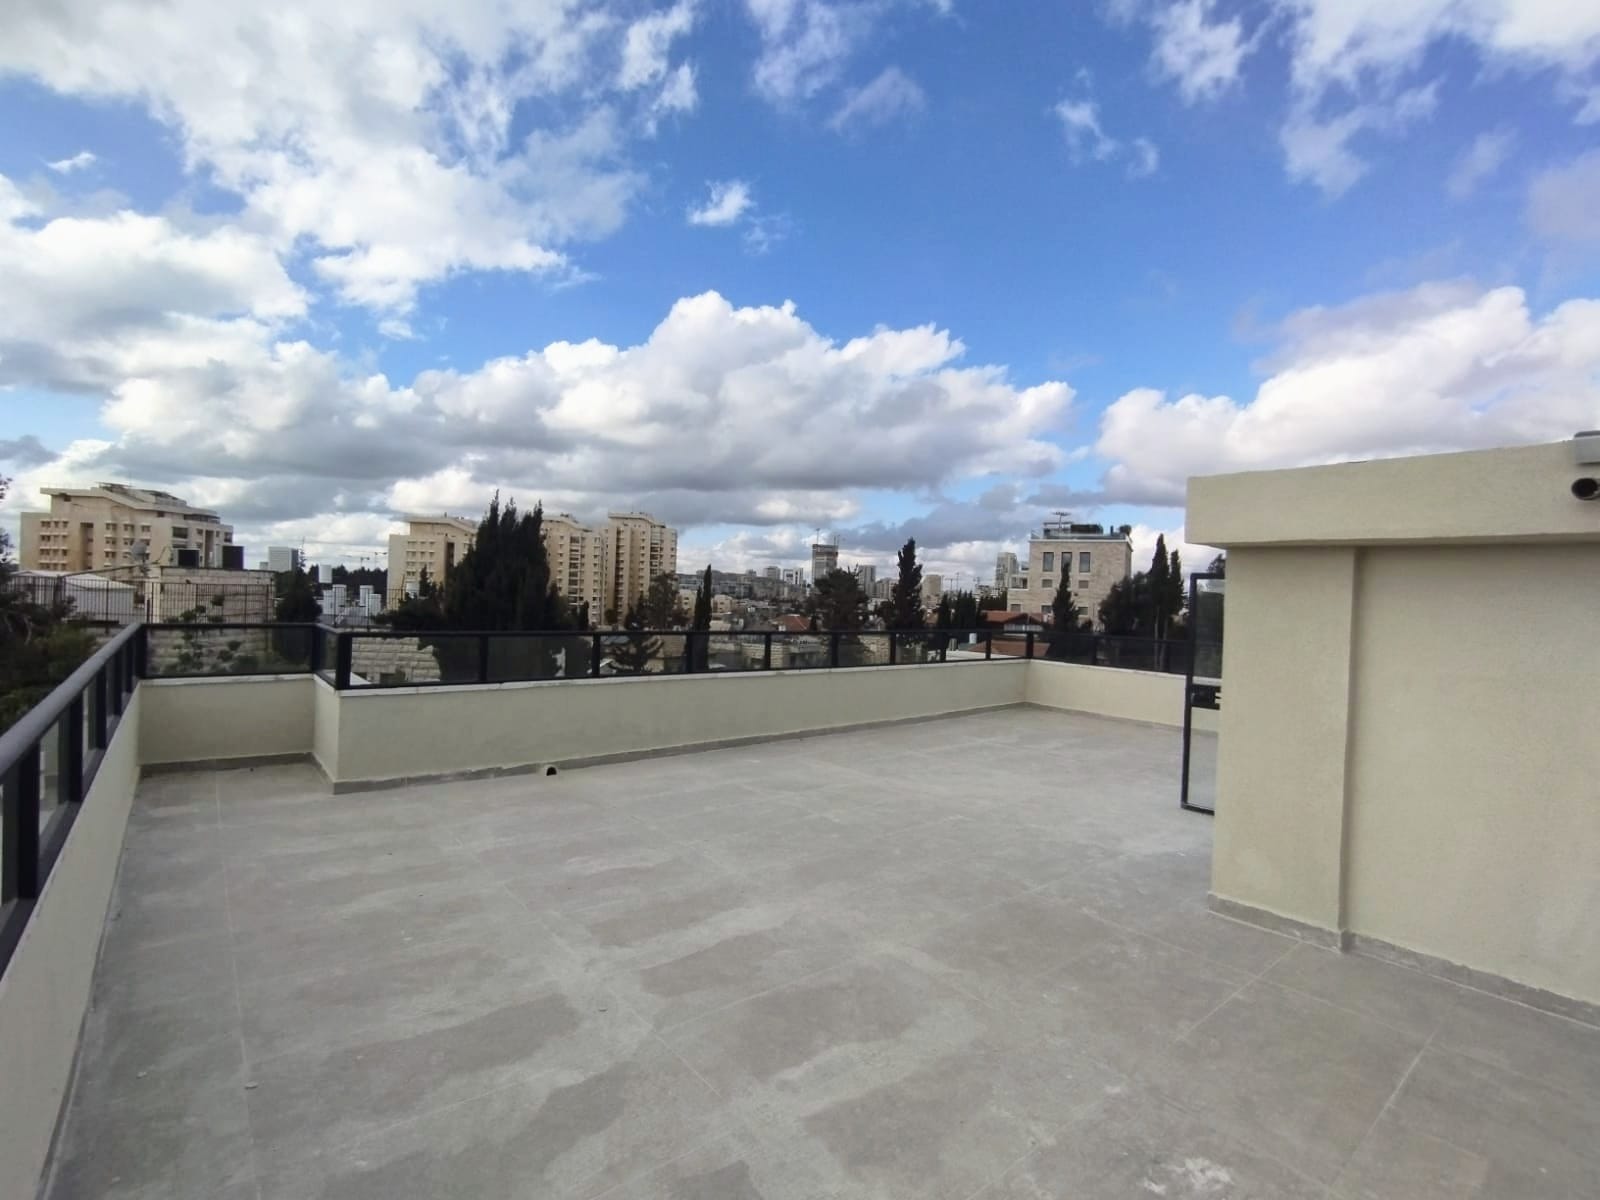 For Sale: A Duplex Penthouse Apartment in Shaarei Chesed